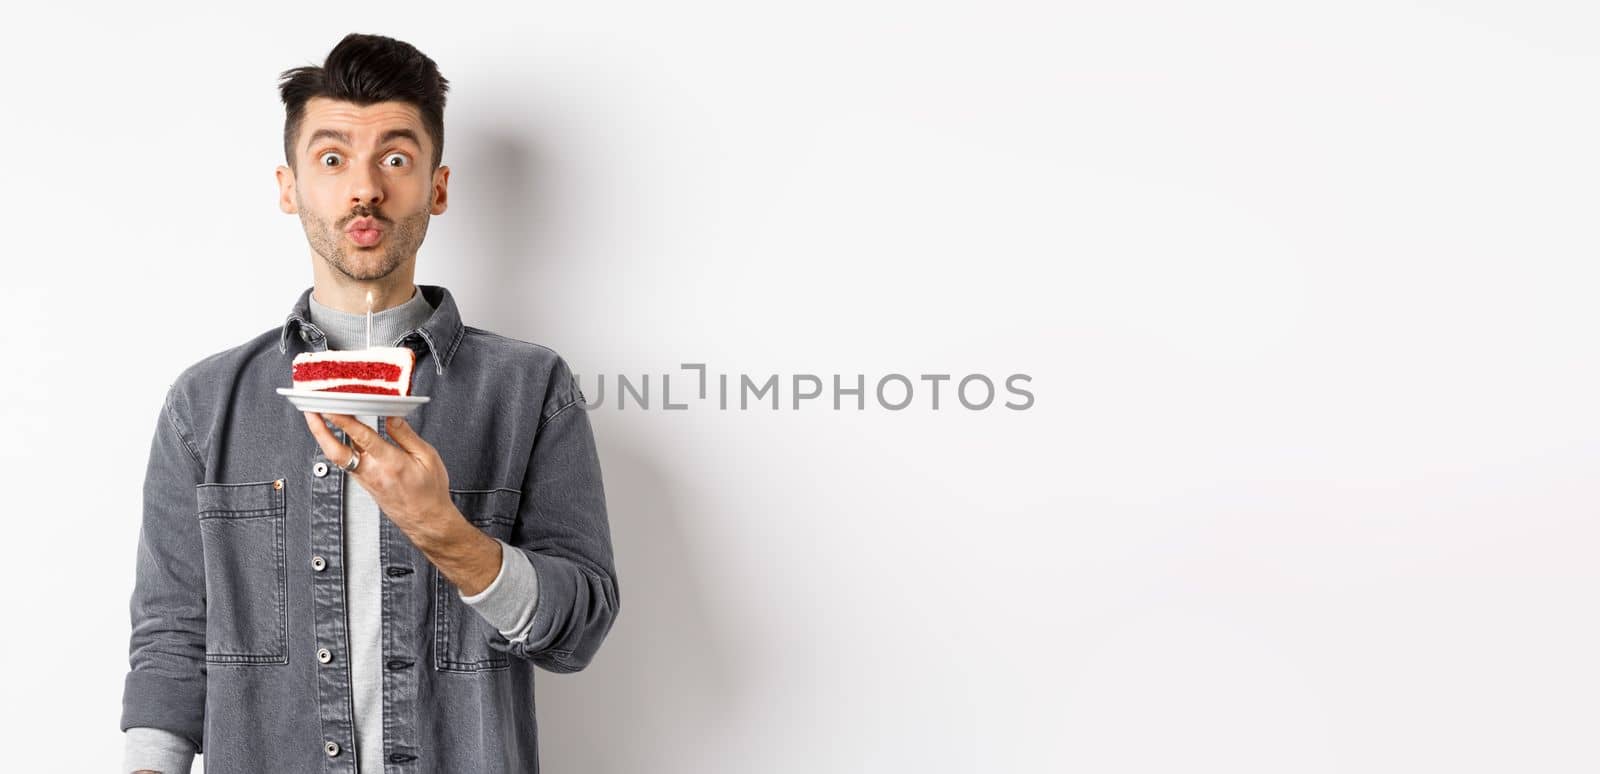 Man celebrating birthday, blowing candle on cake and making wish, standing on white background.